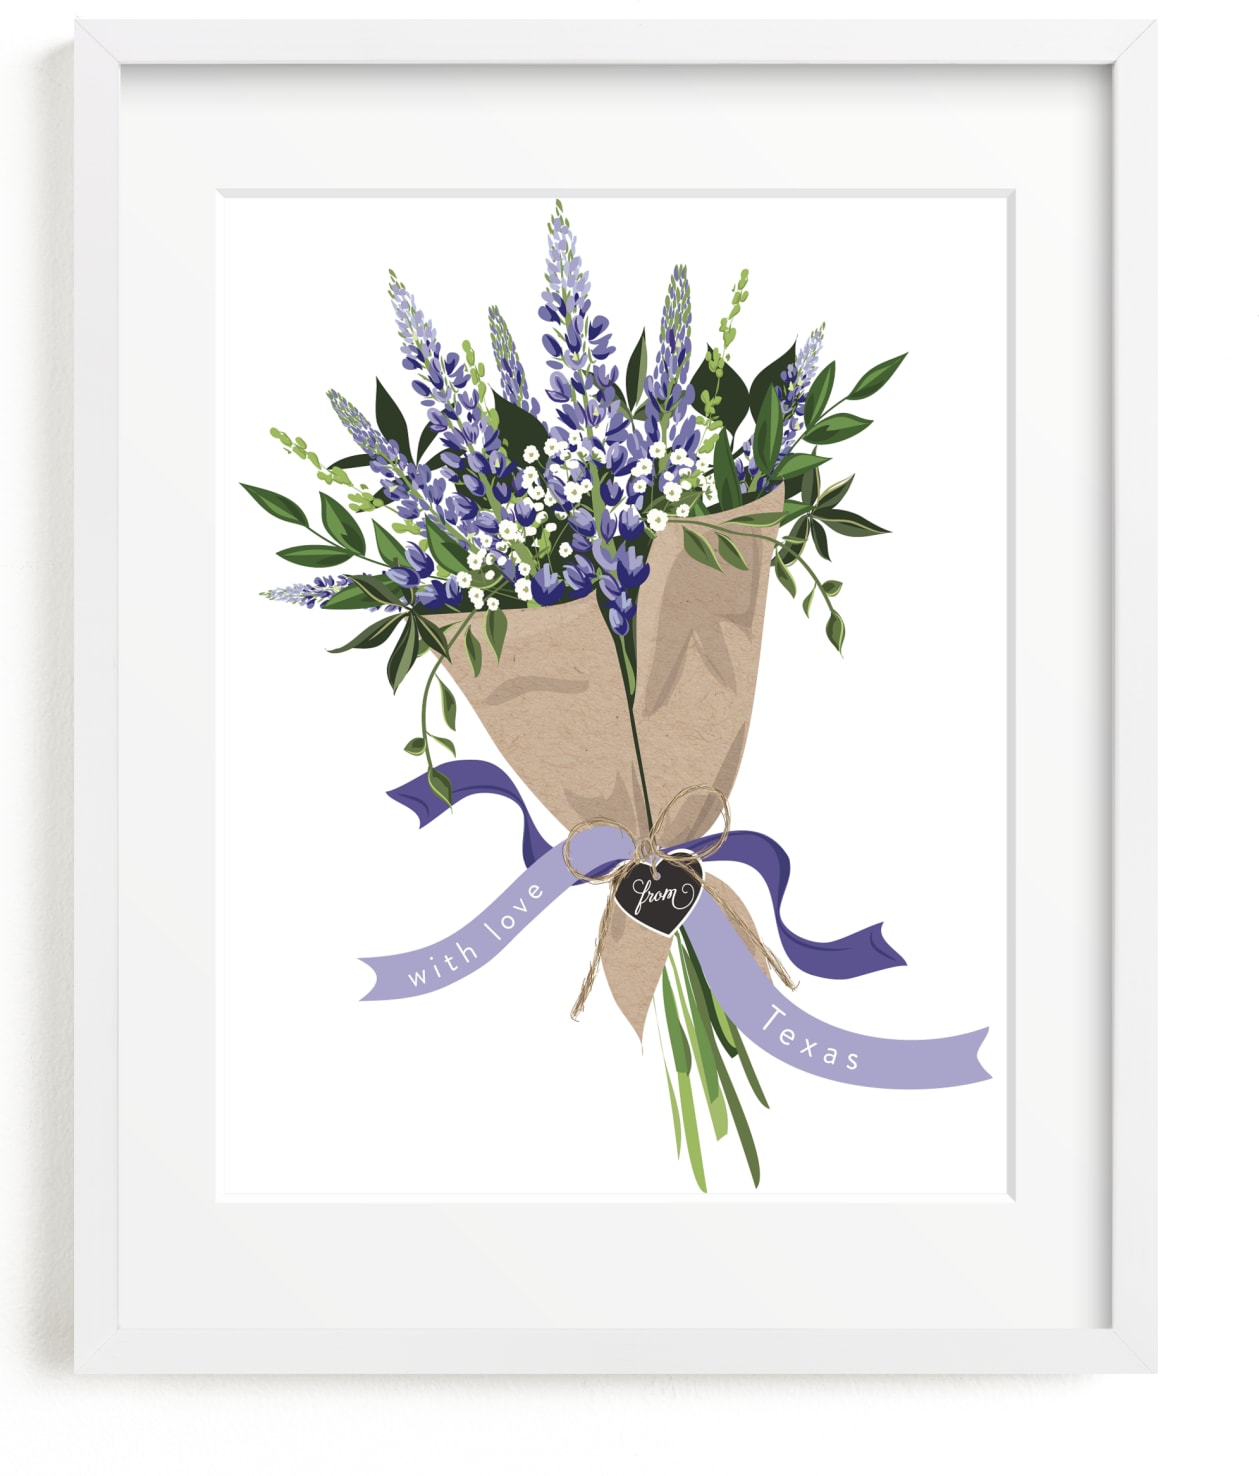 This is a white art by Susan Moyal called Texas Bluebonnet Bouquet.